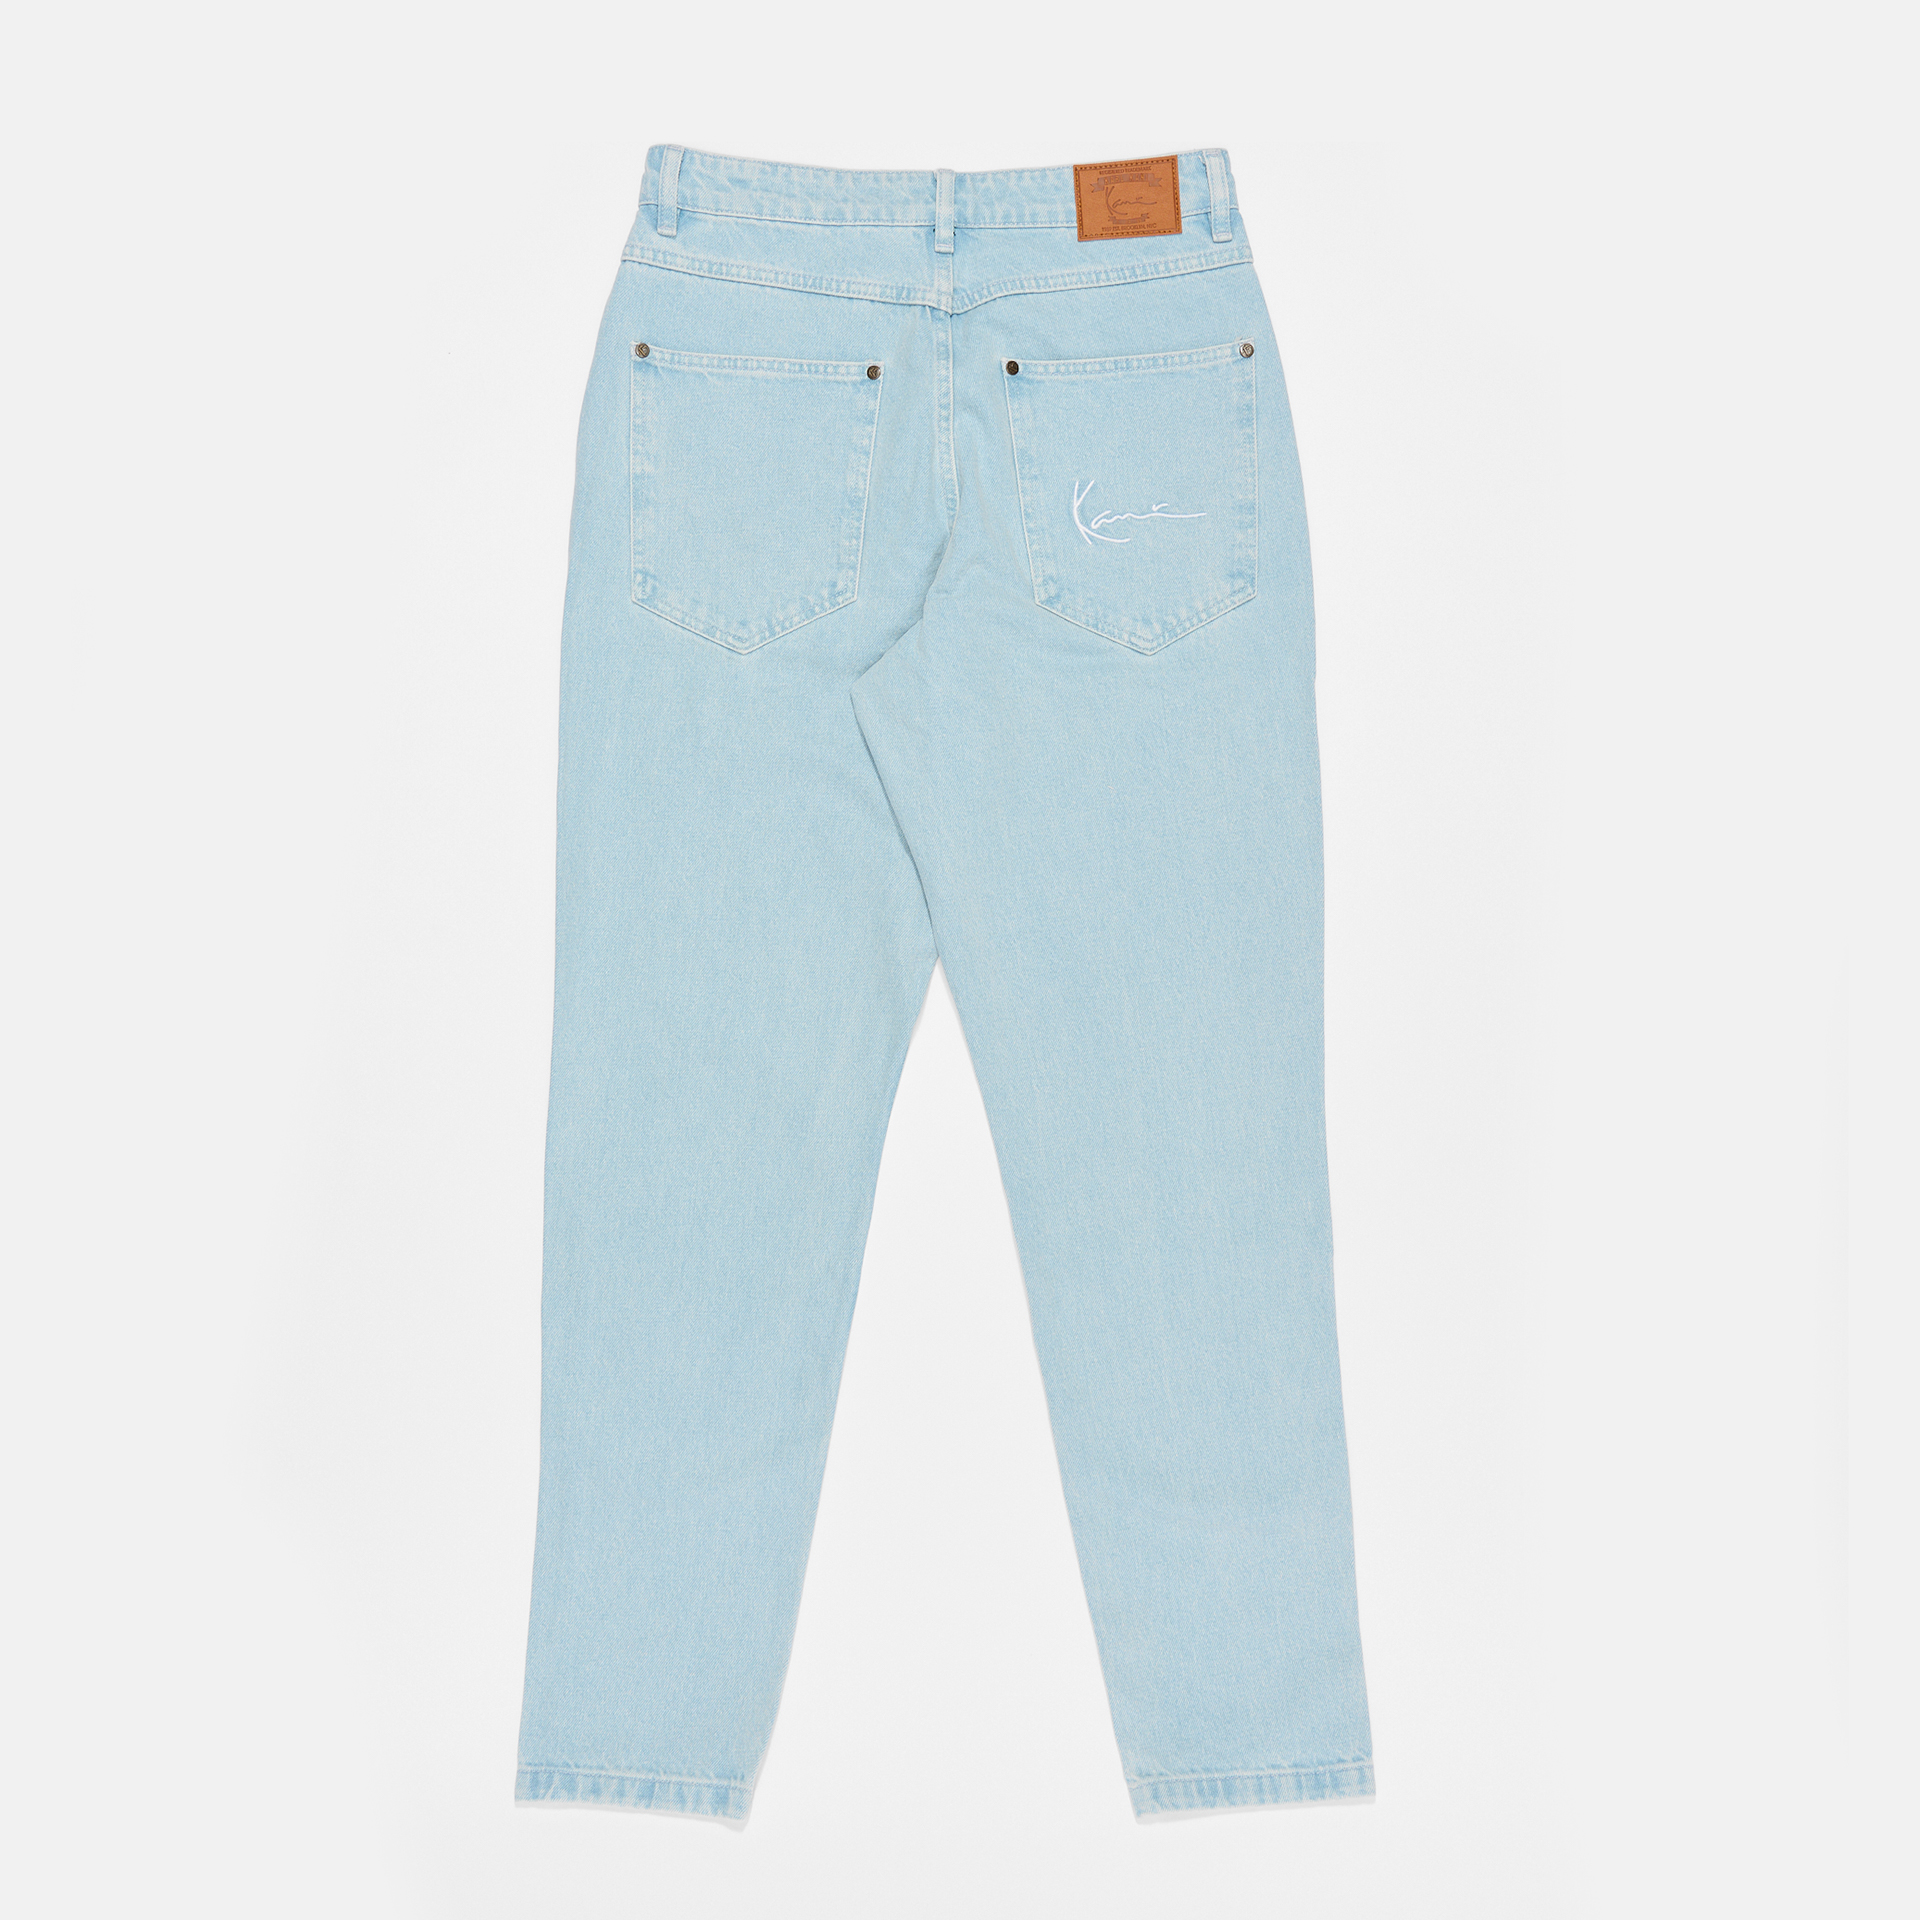 Karl Kani Small Signature Tapered Five Pocket Bleached Blue